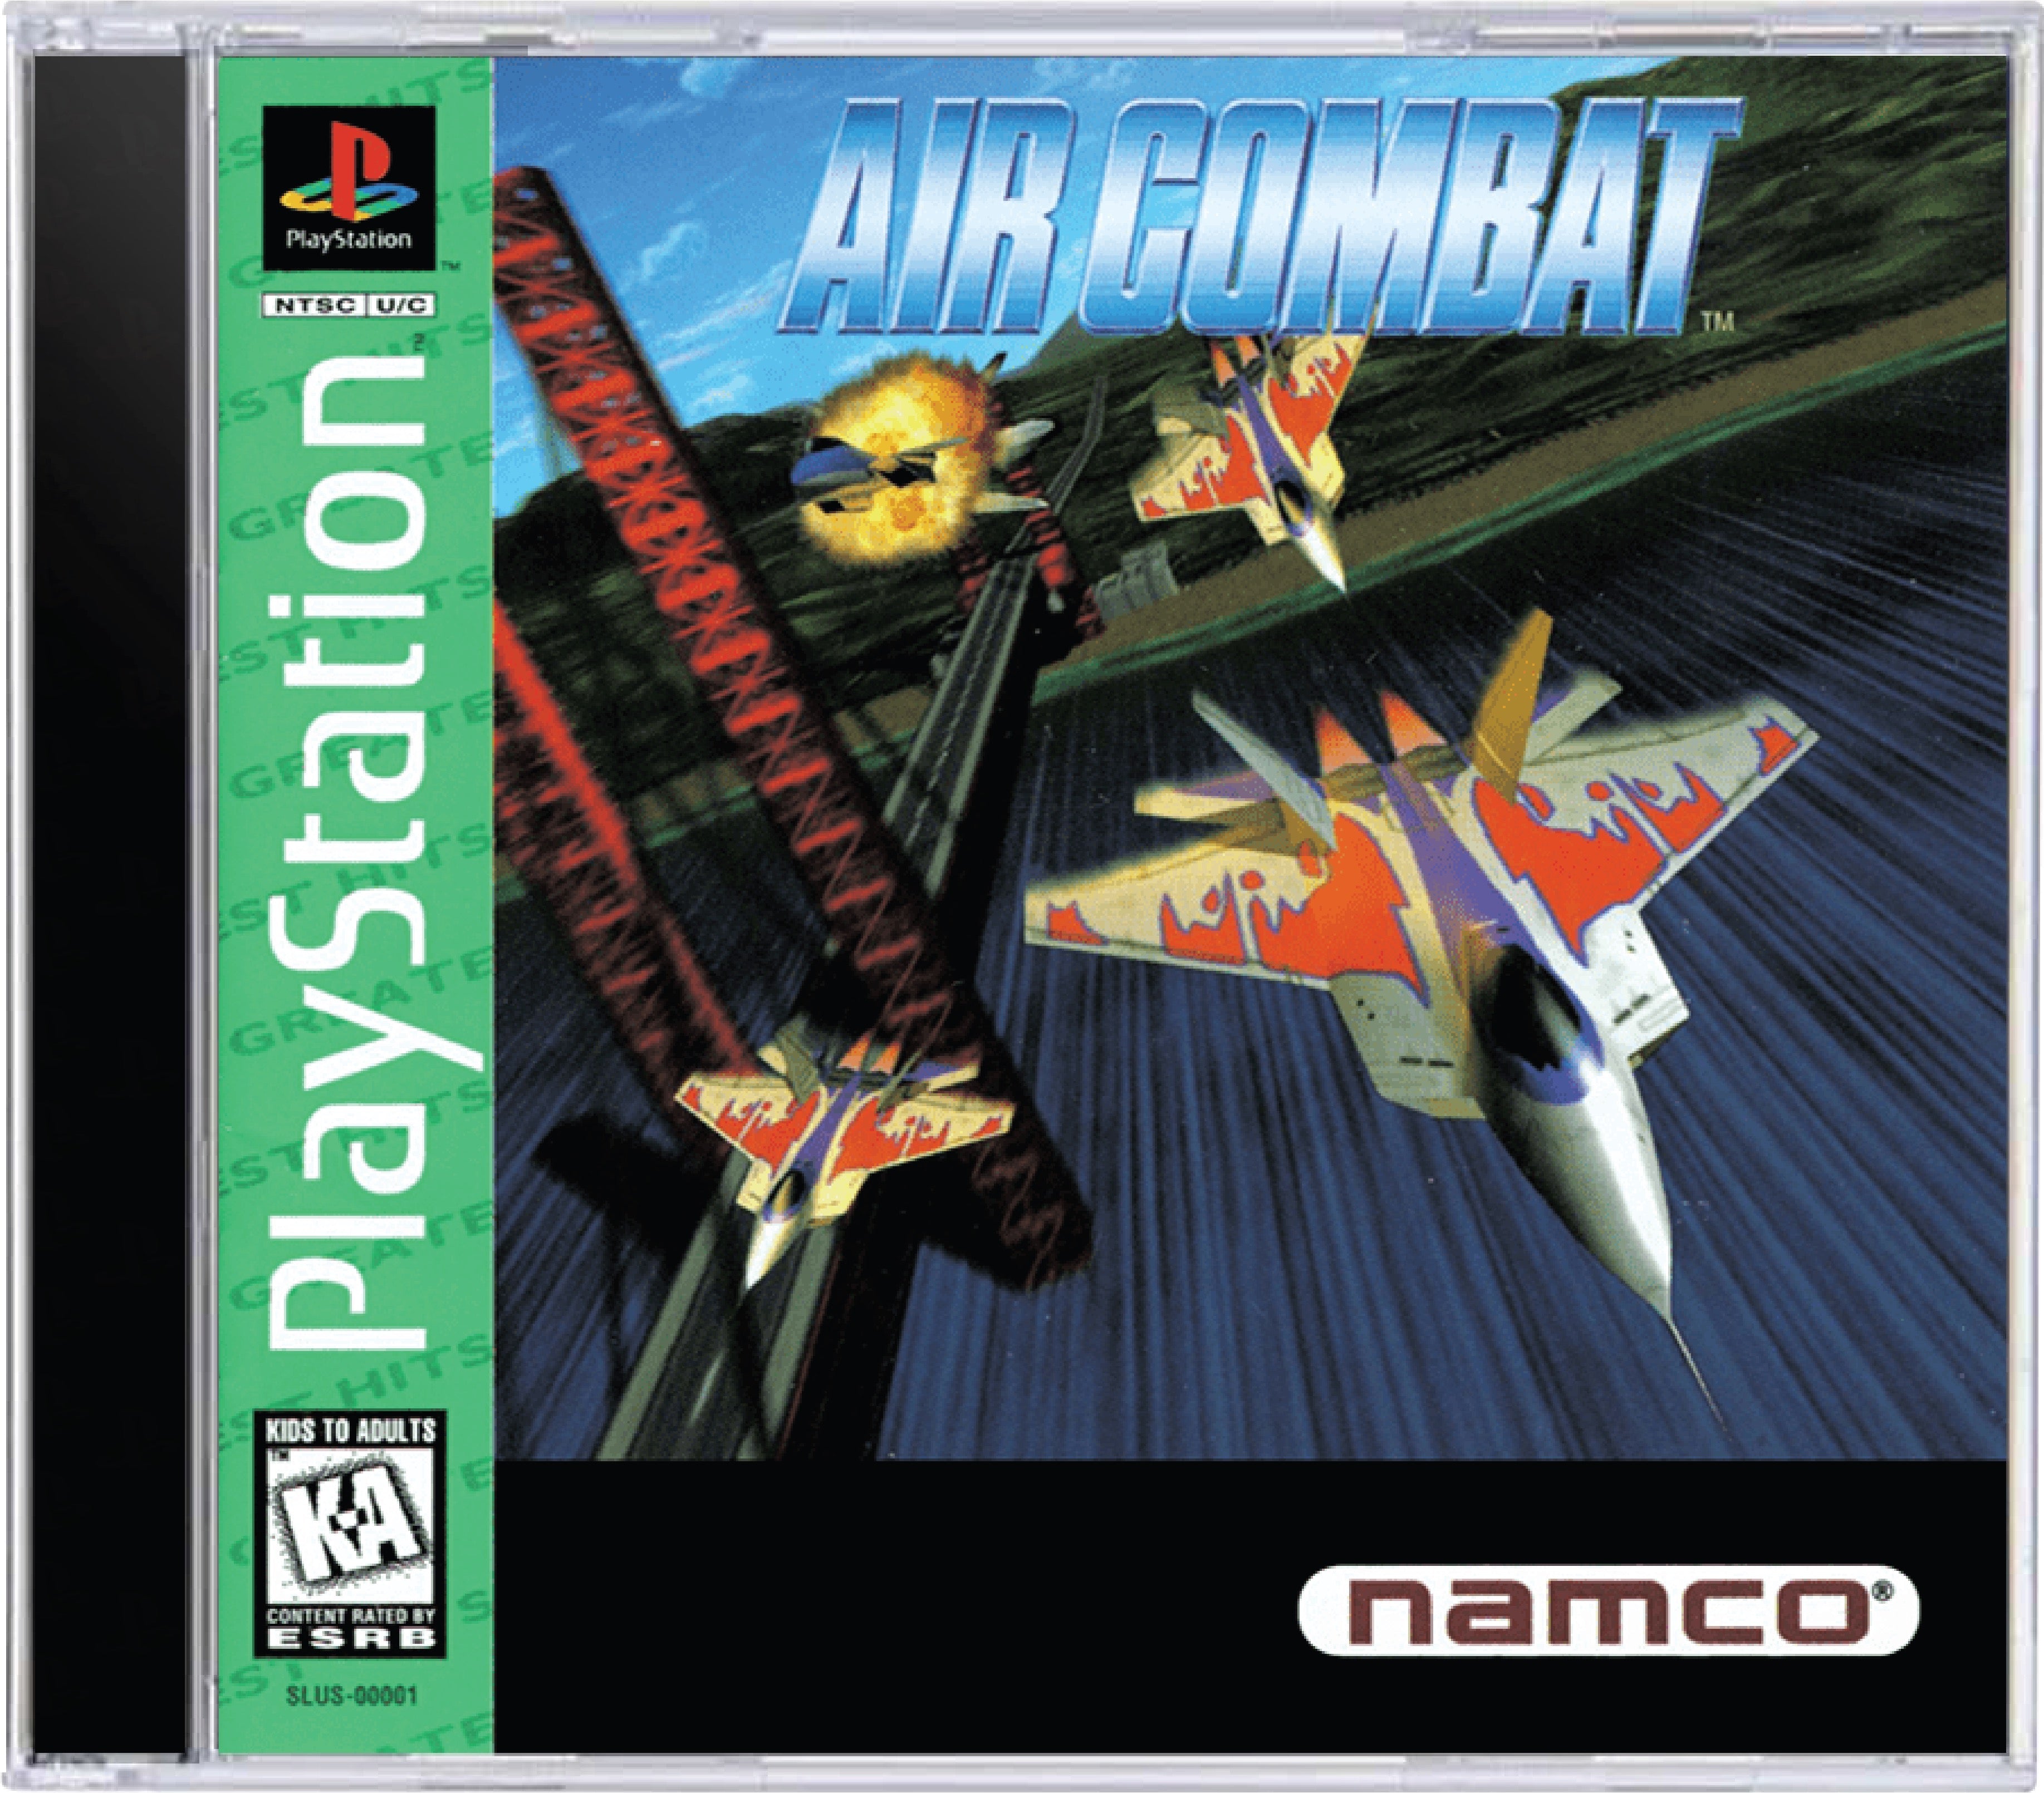 Air Combat Cover Art and Product Photo